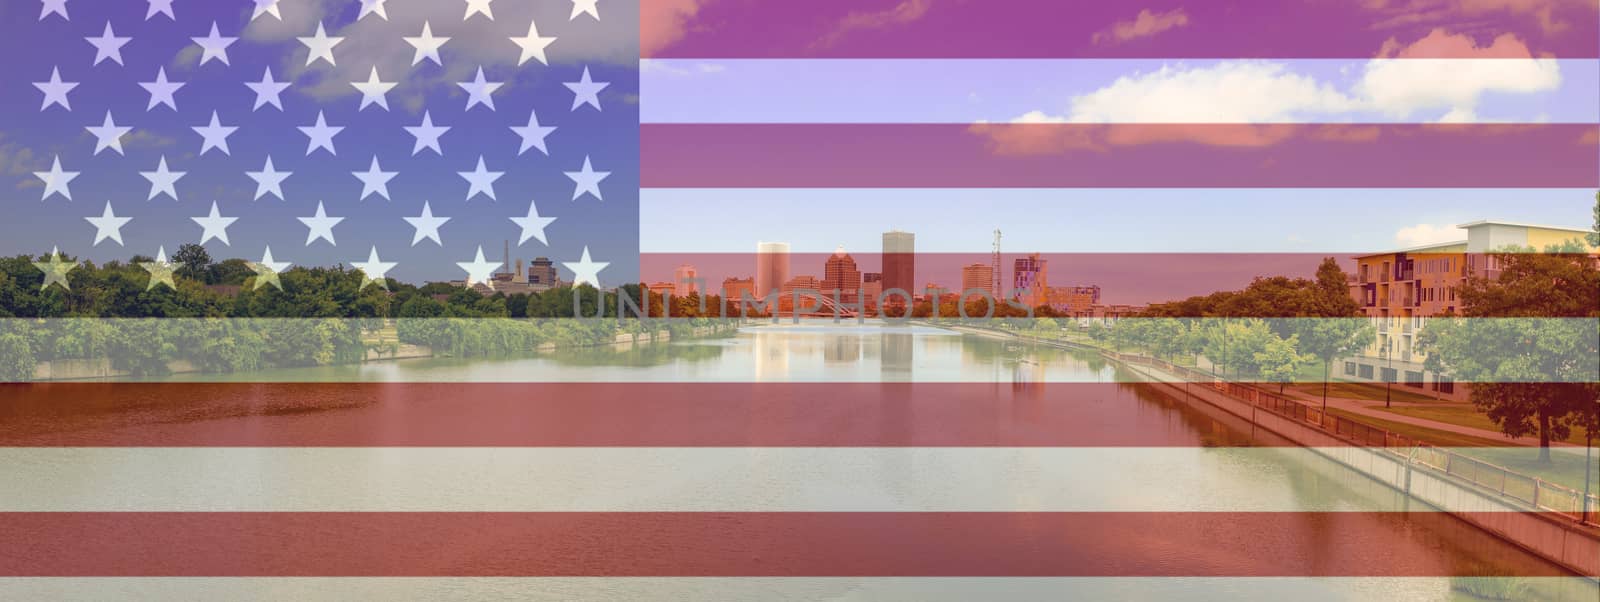 Rochester New York Panorama with a USA flag composite by mynewturtle1